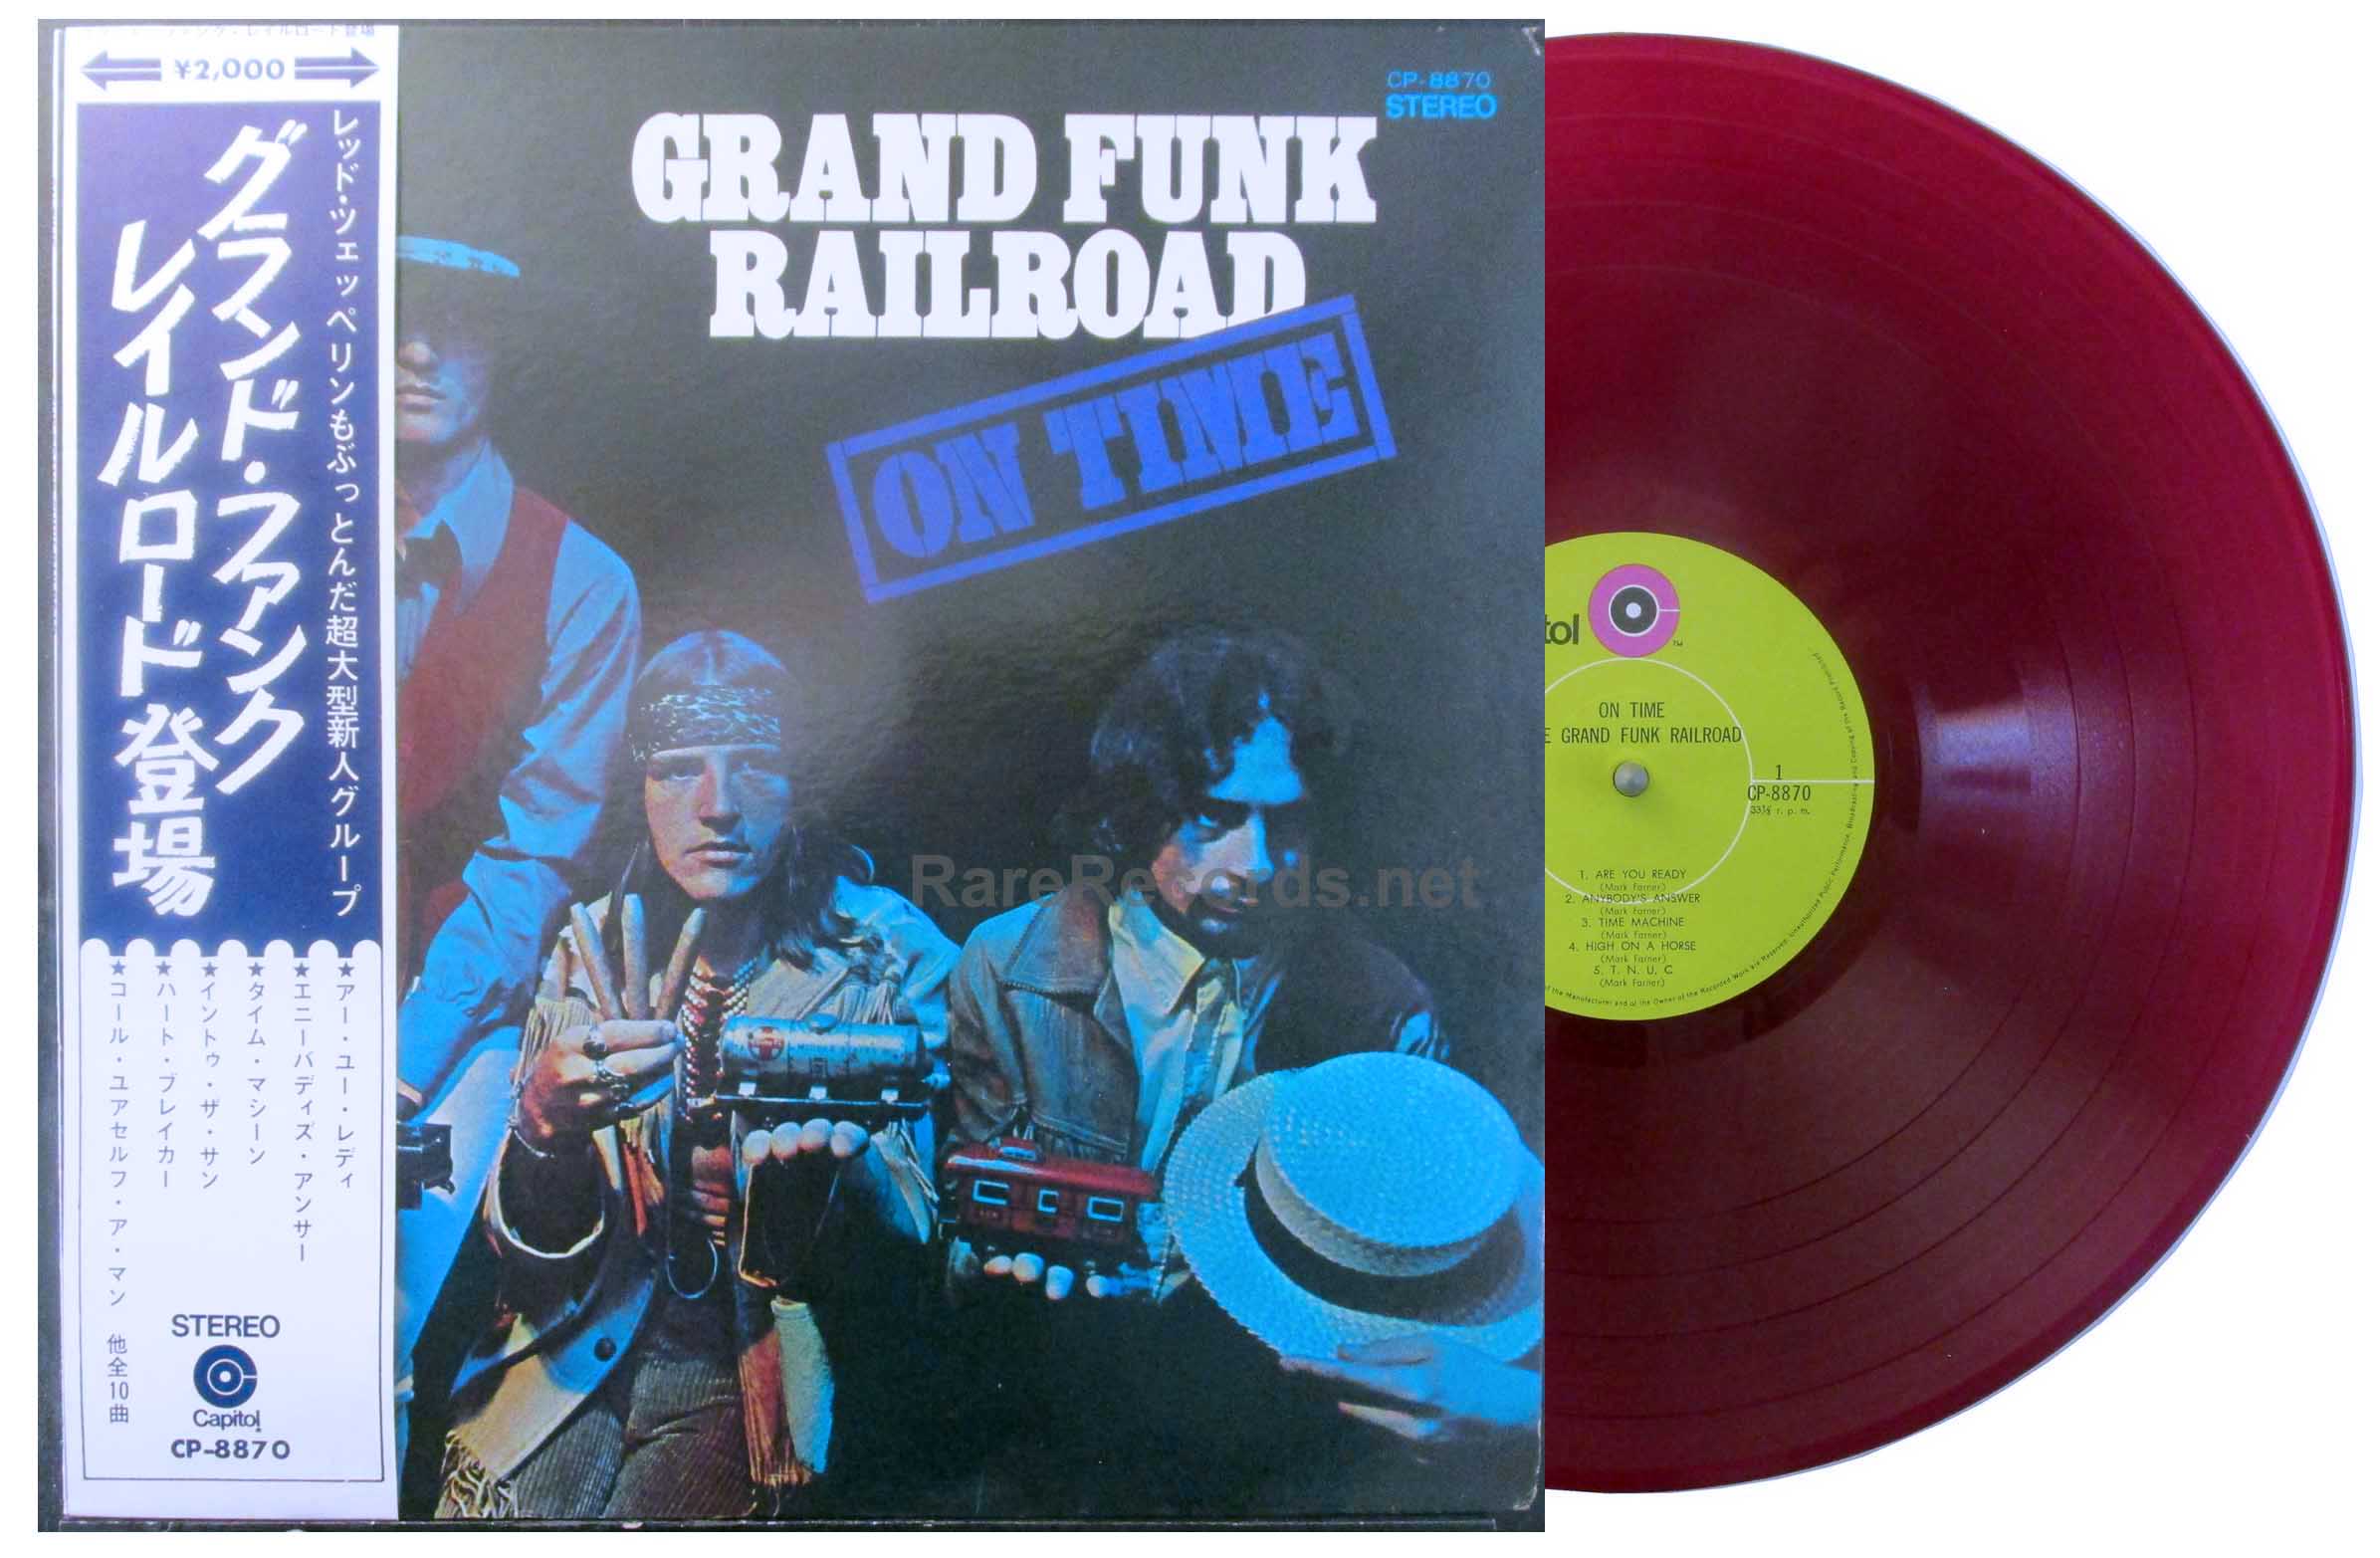 Funk Railroad On Japan red vinyl LP with